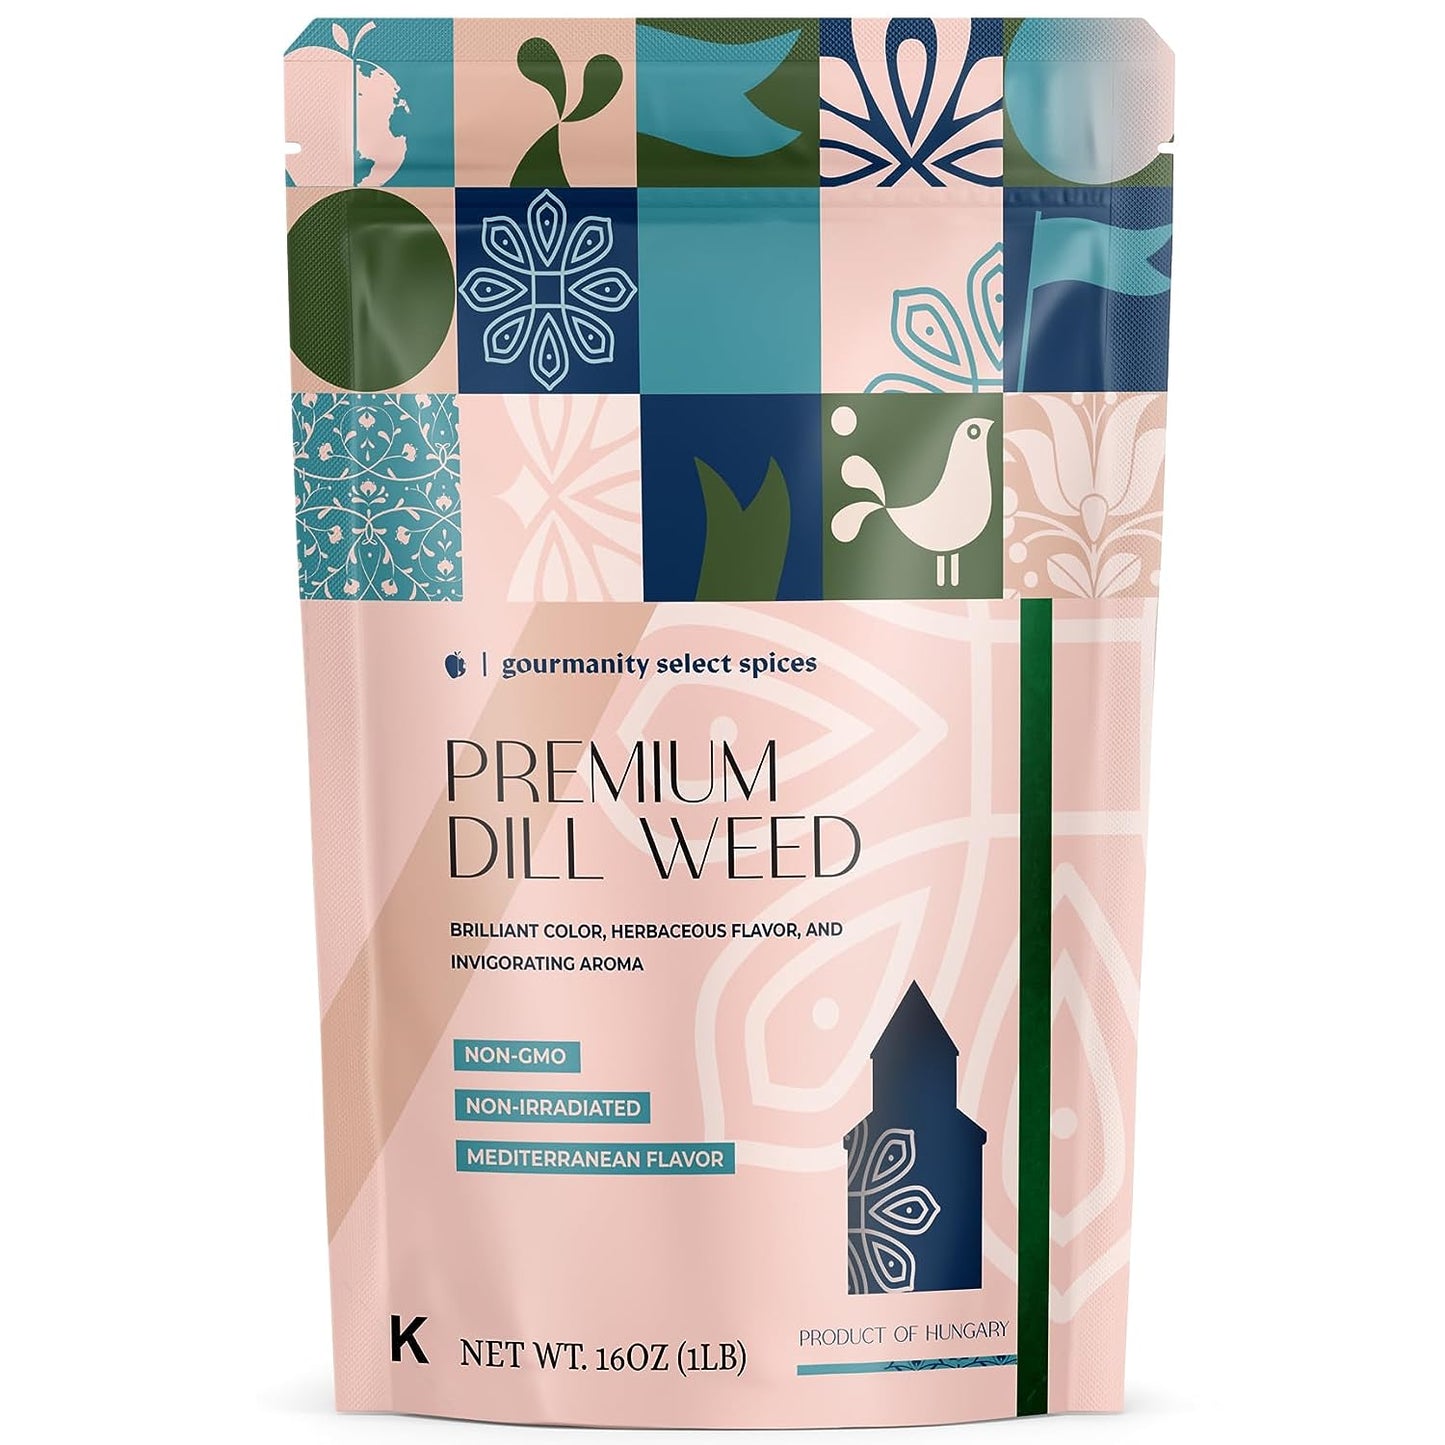 Gourmanity Dill Weed 1lb - Gourmanity